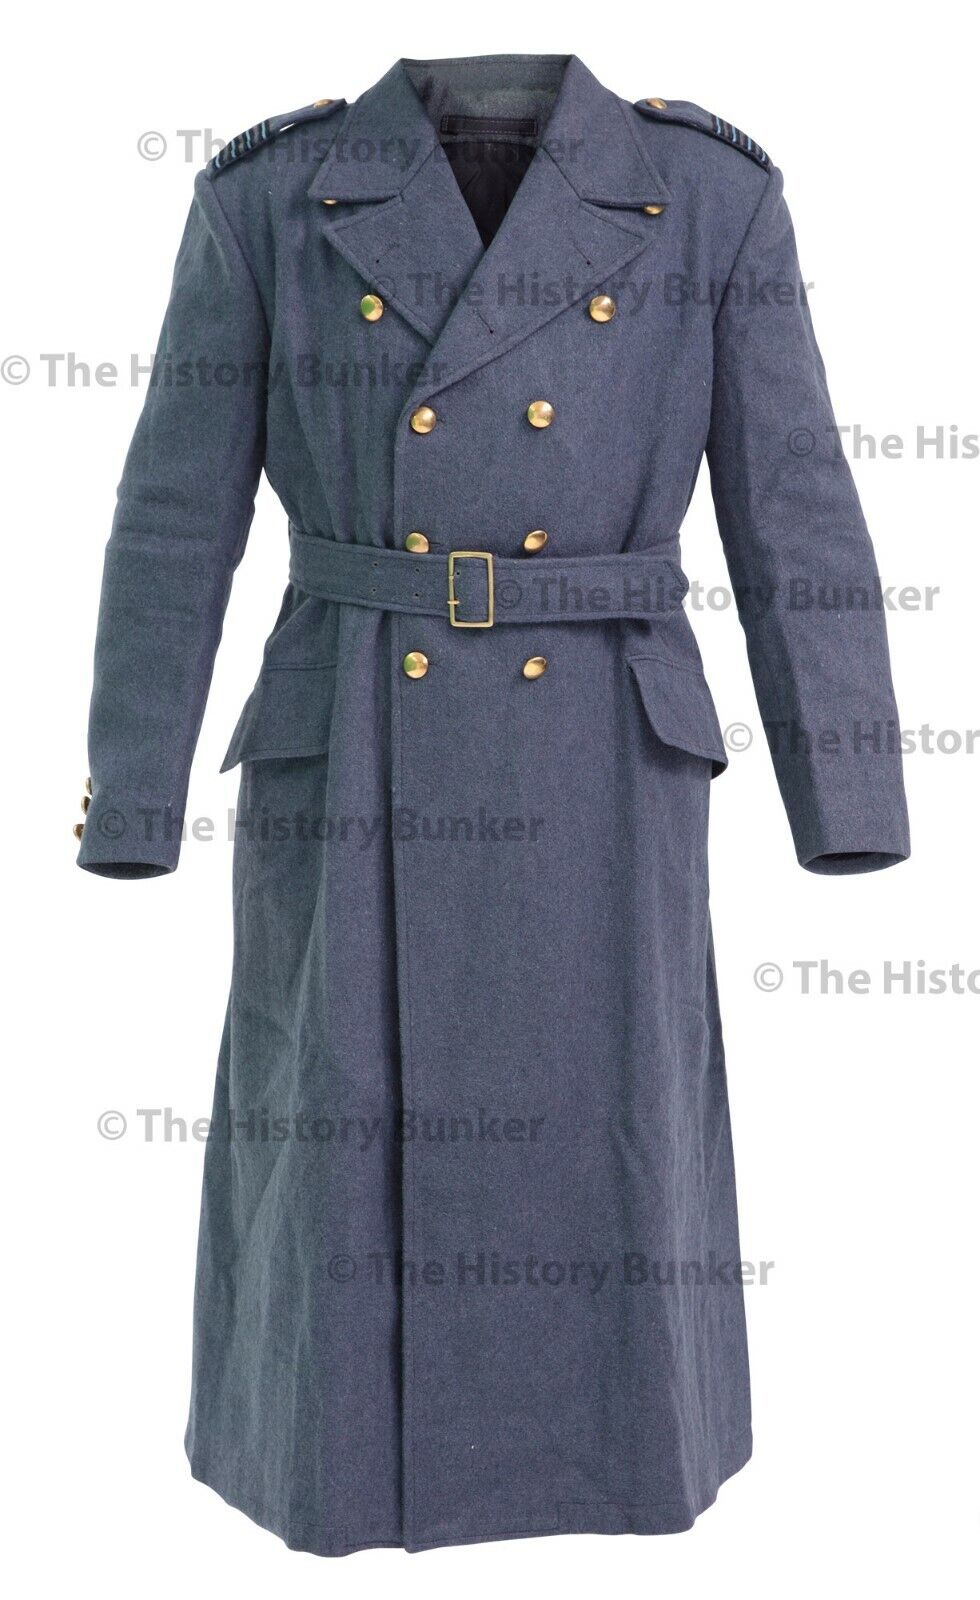 WW2 British RAF overcoat repro - made to your sizes